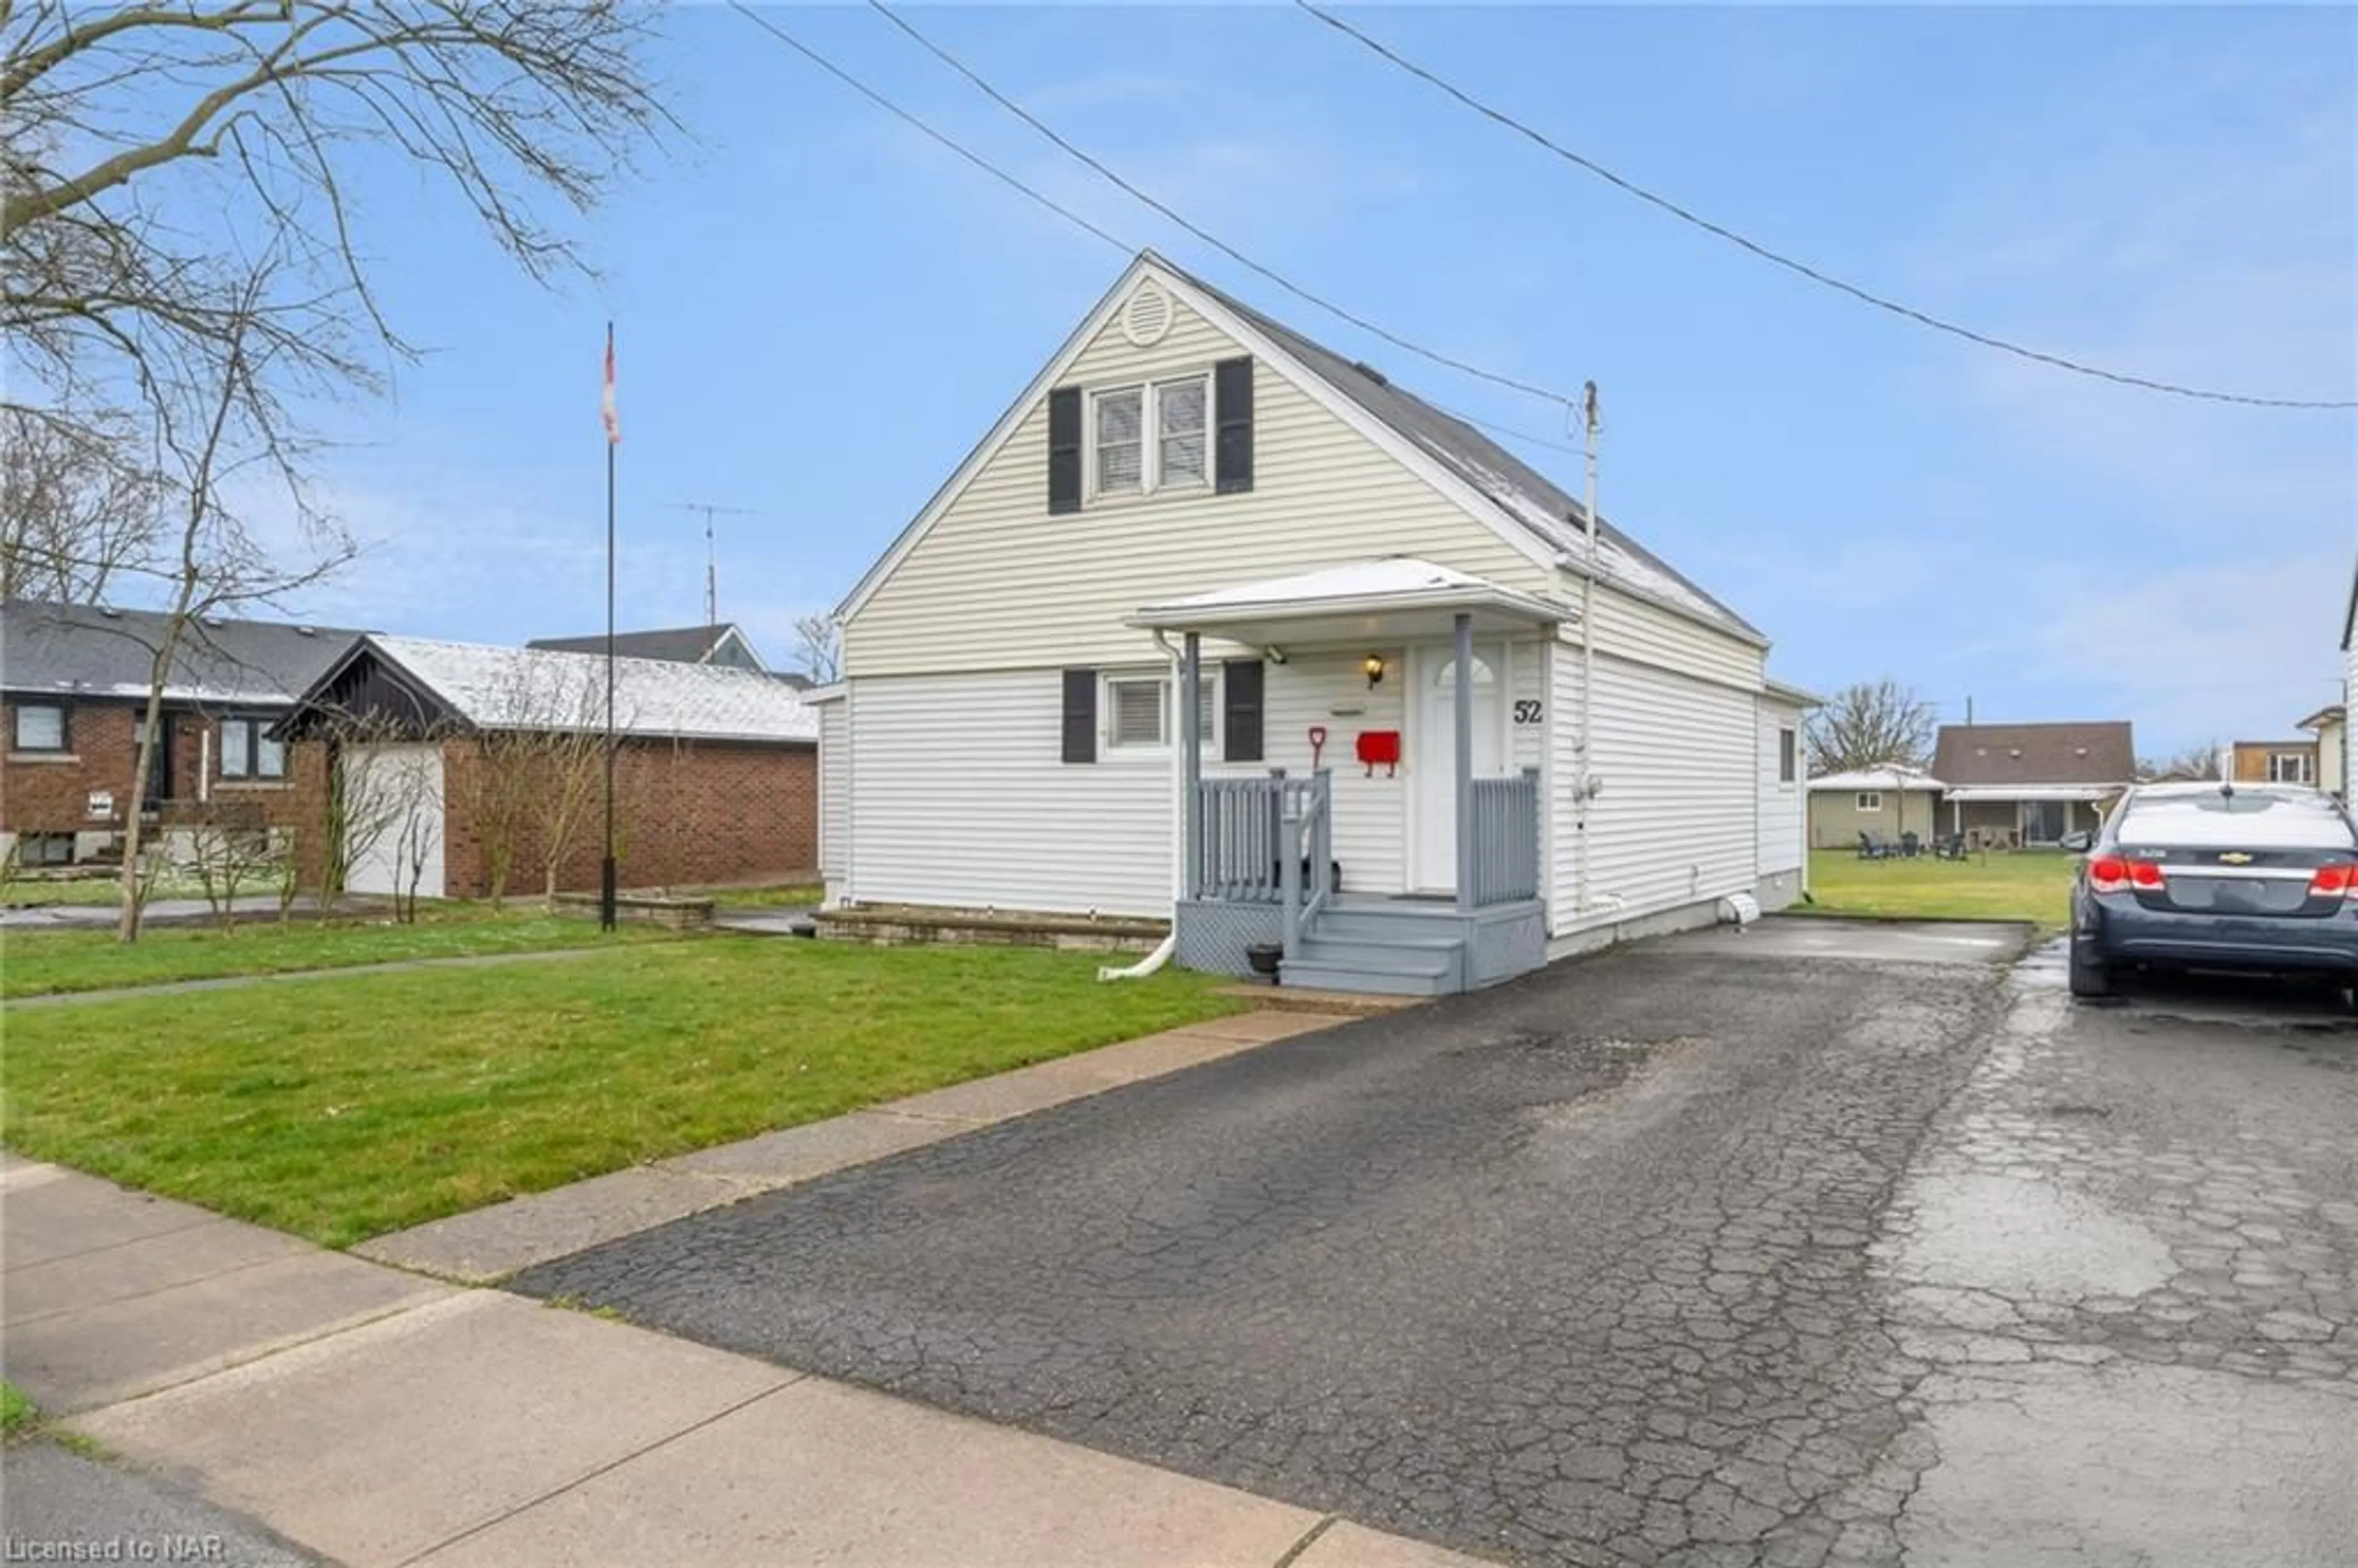 Frontside or backside of a home for 52 Maitland St, Thorold Ontario L2V 3A8